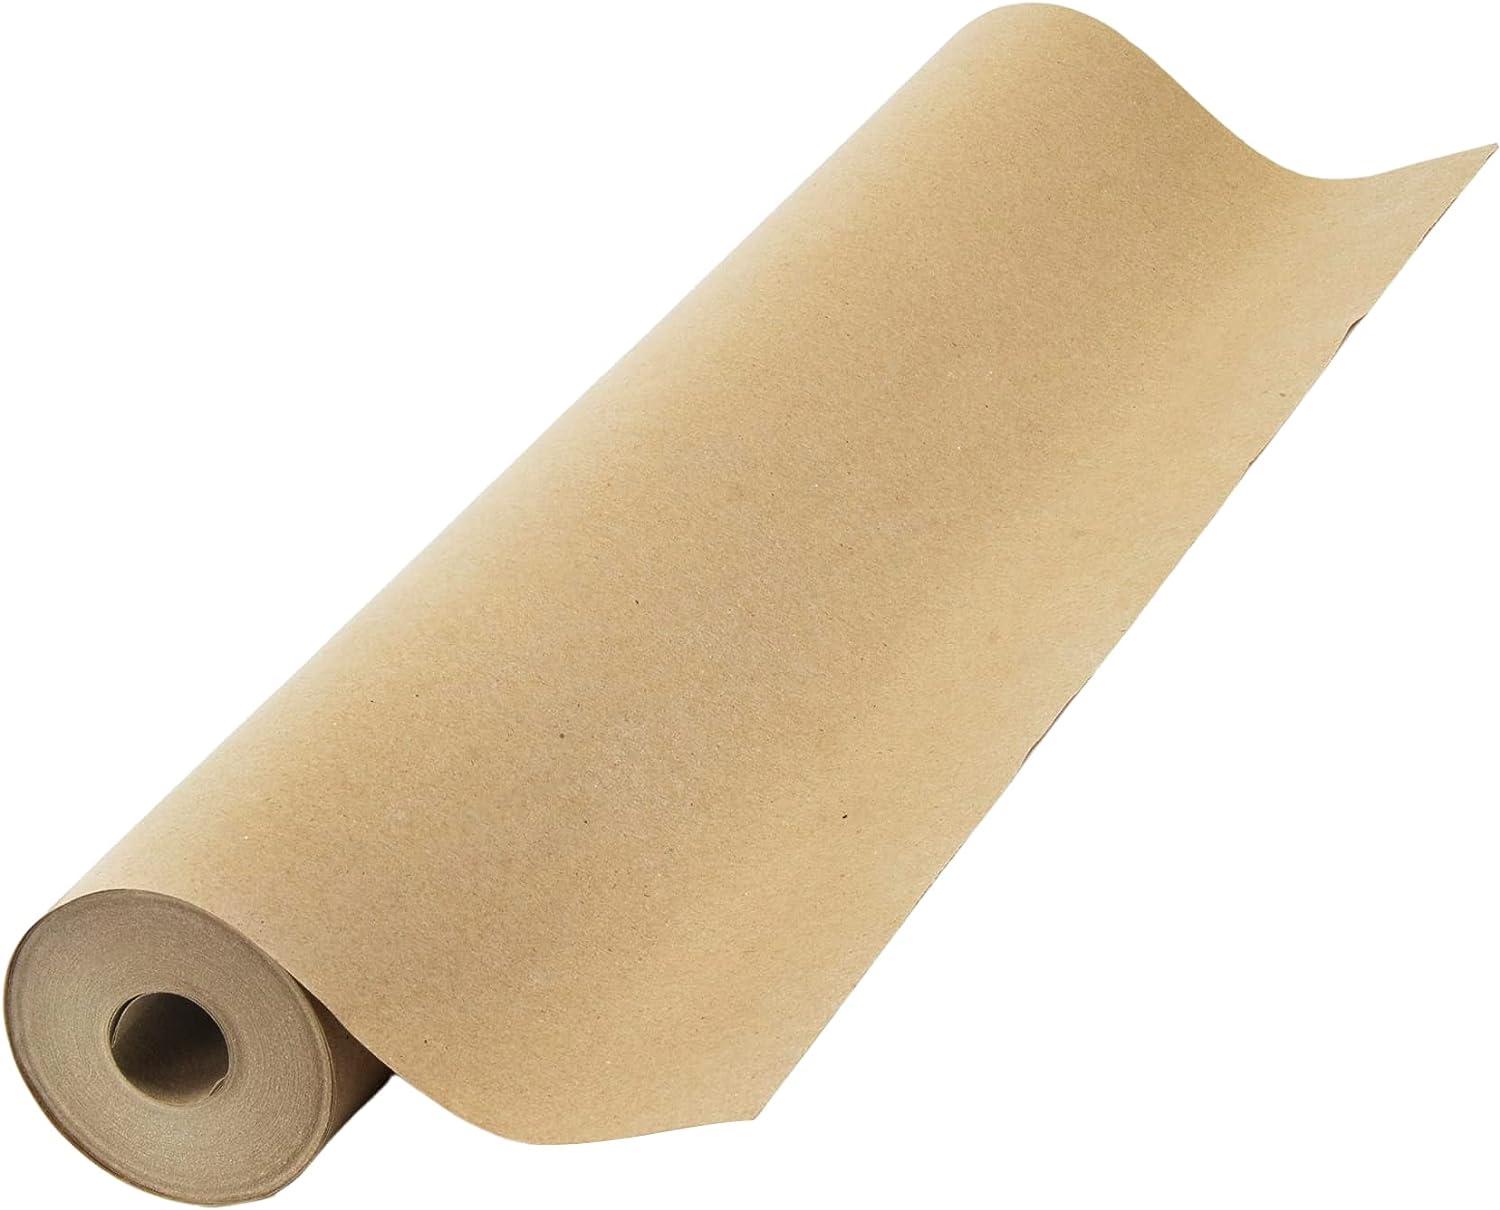 Brown Kraft Paper Ideal for Gift Wrapping Packing Roll for Moving Art Craft  Shipping Floor Covering Wall 100% Recycled Material - AliExpress